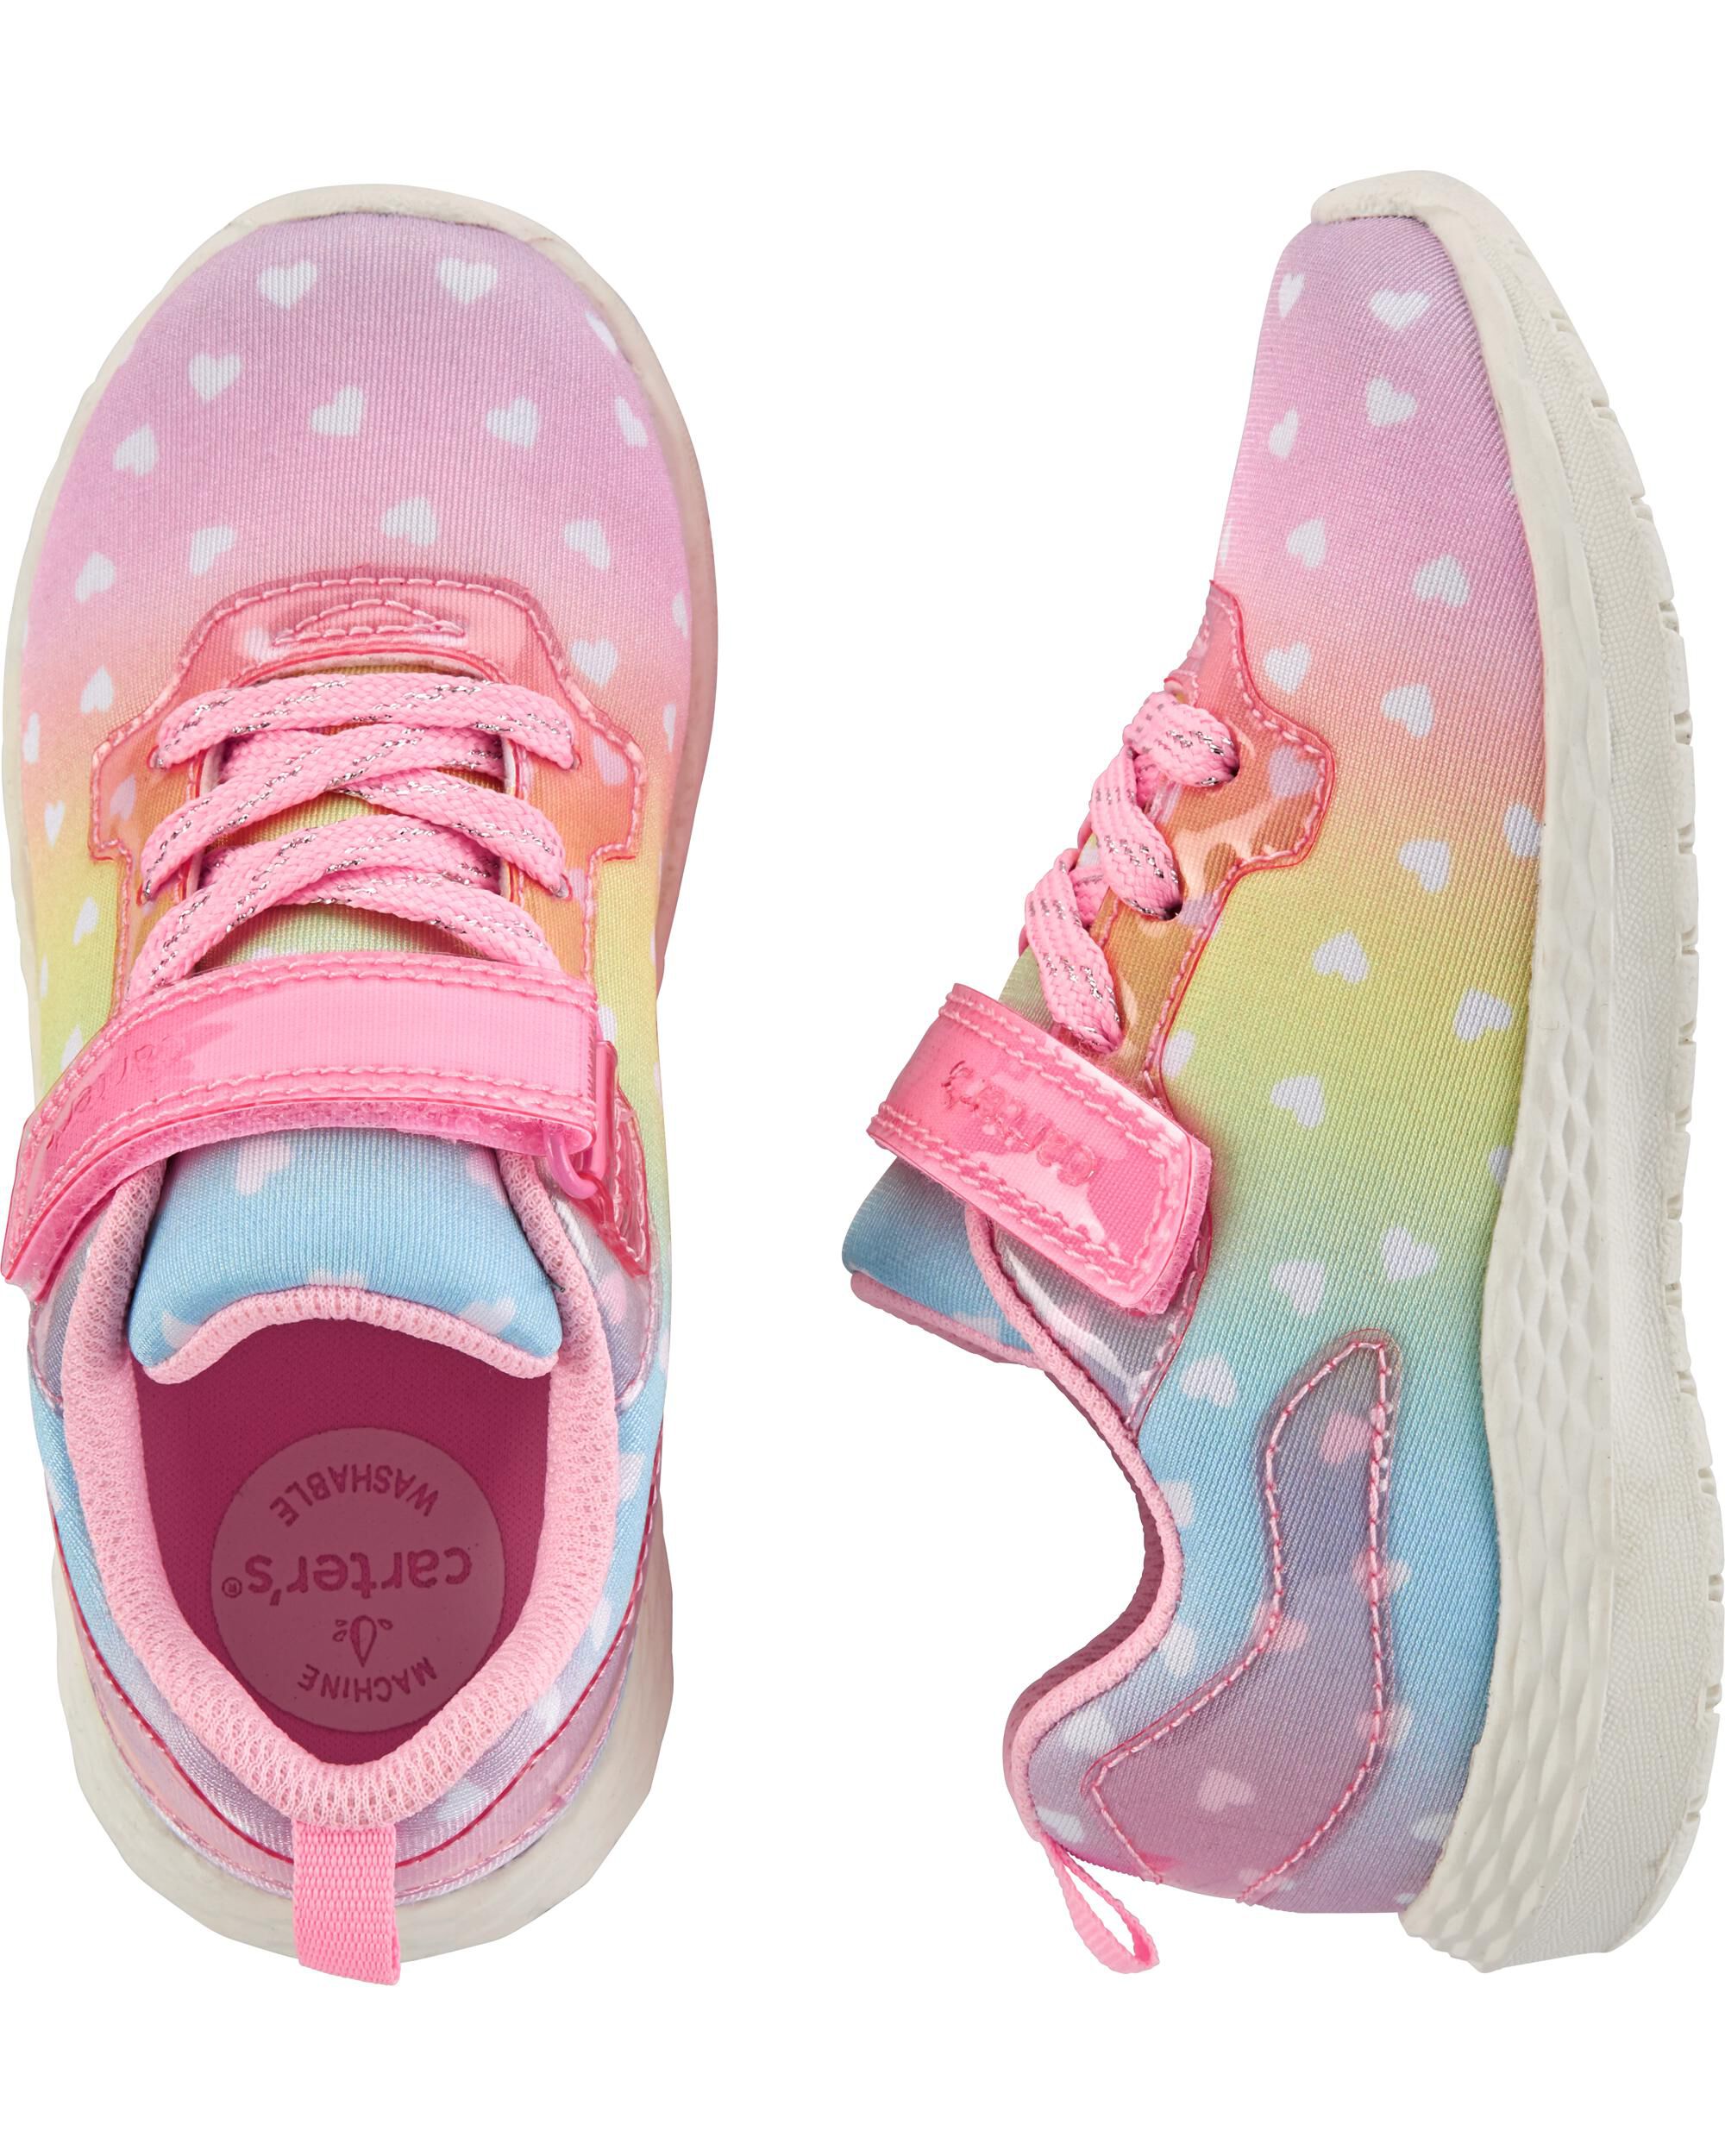 carters shoes baby girl